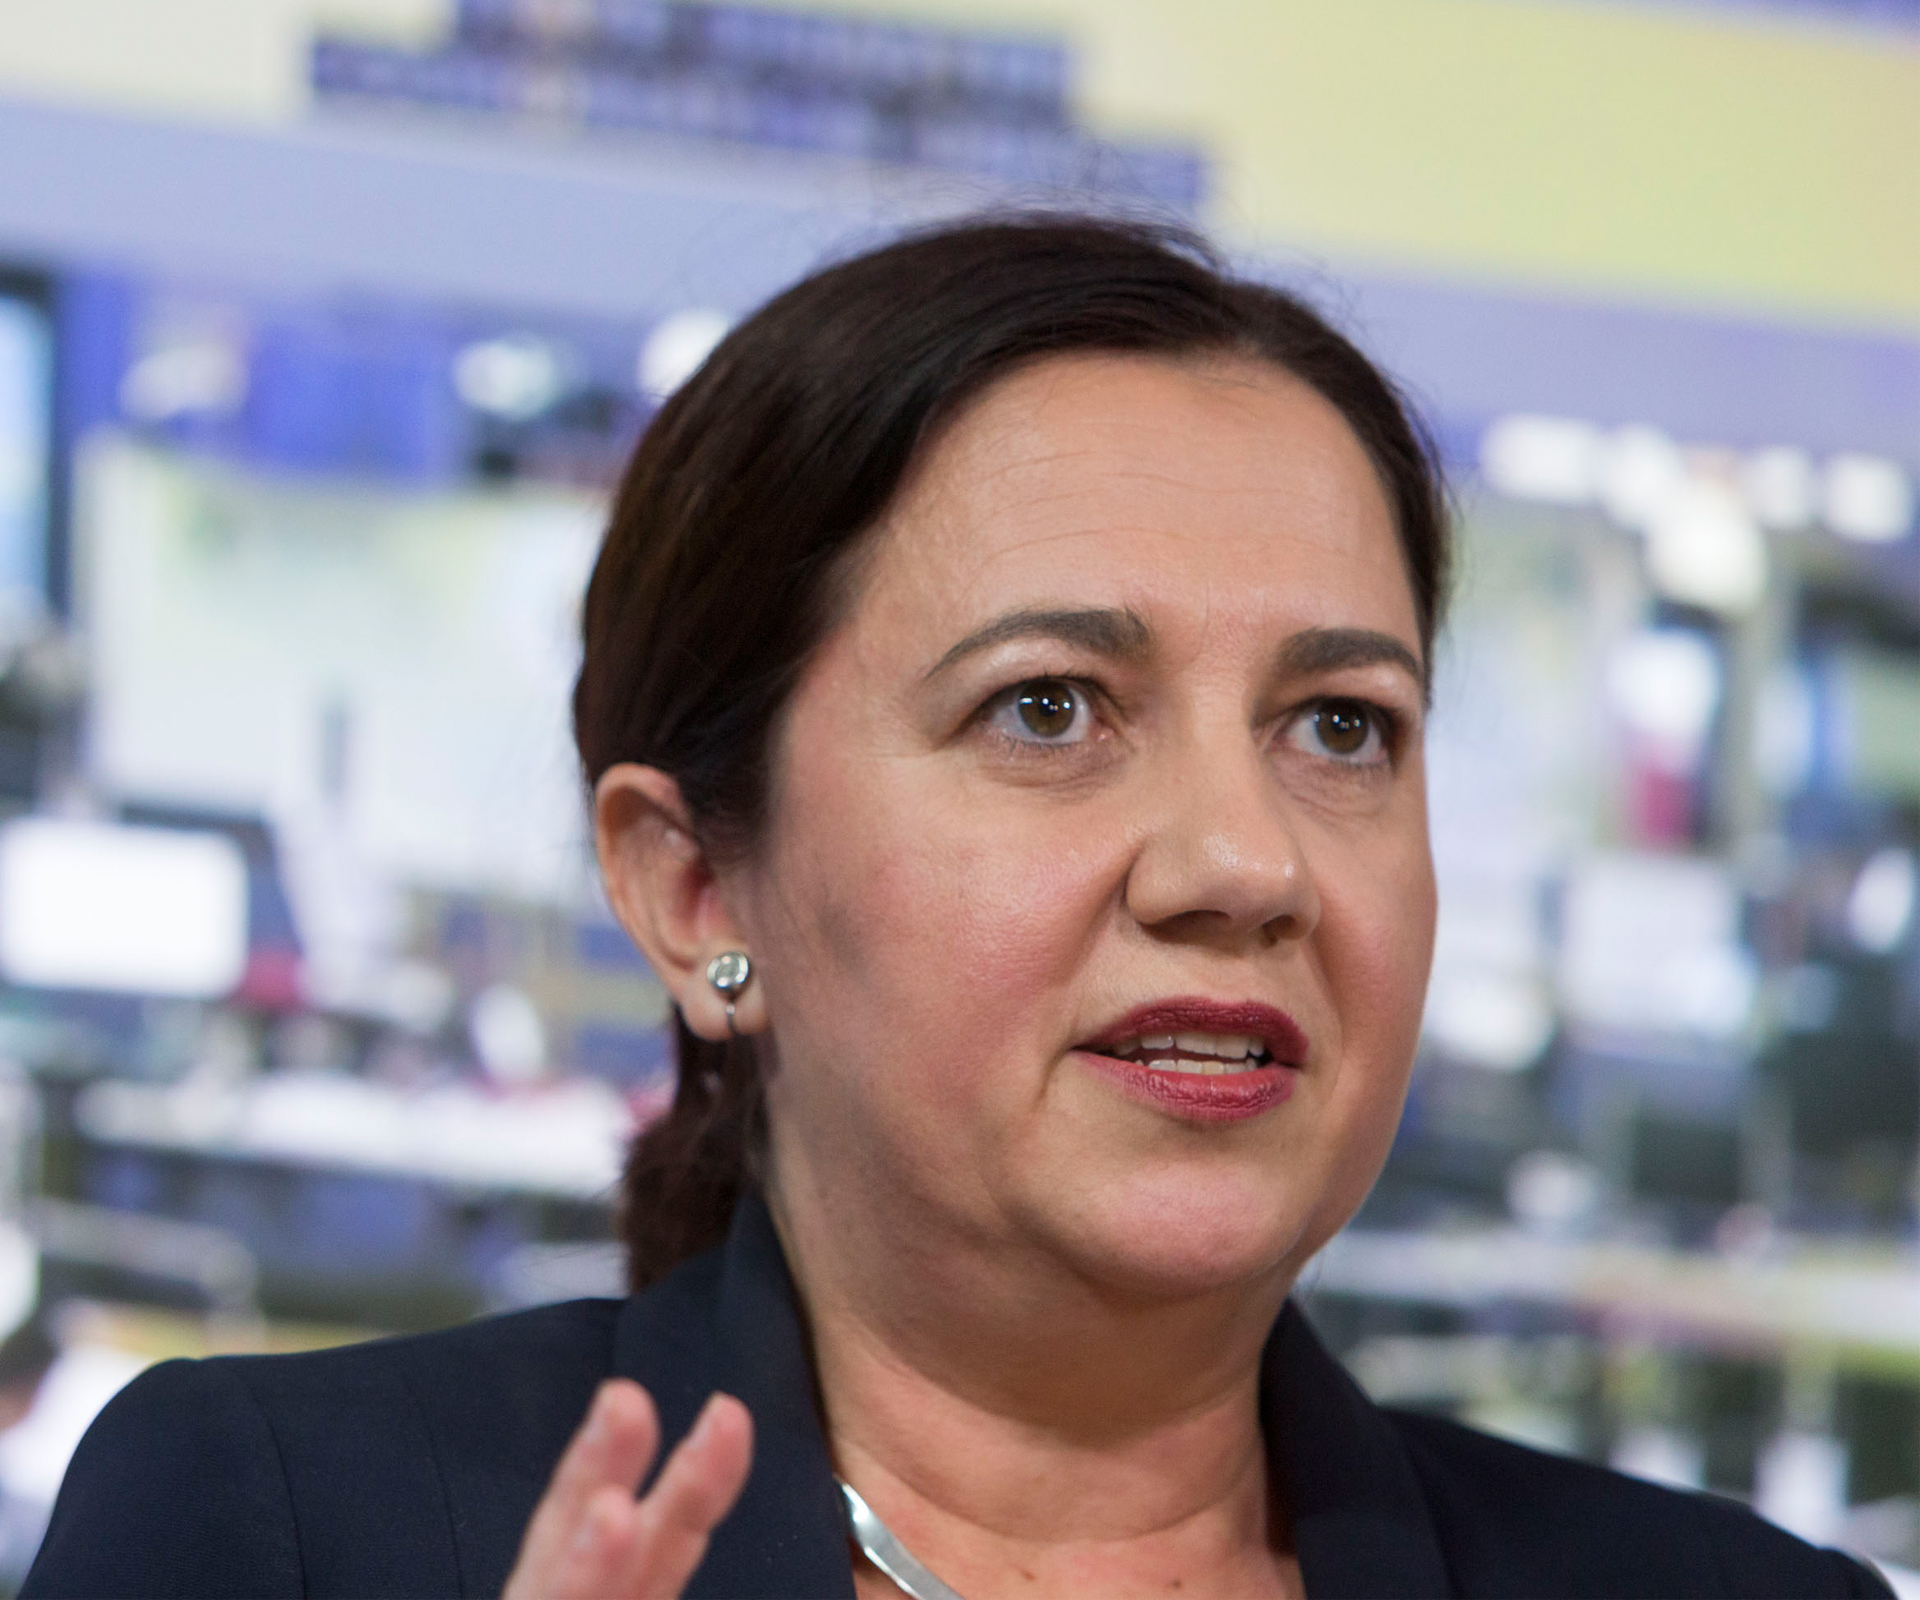 QLD Premier to fast-track laws protecting women as two lose lives to domestic violence